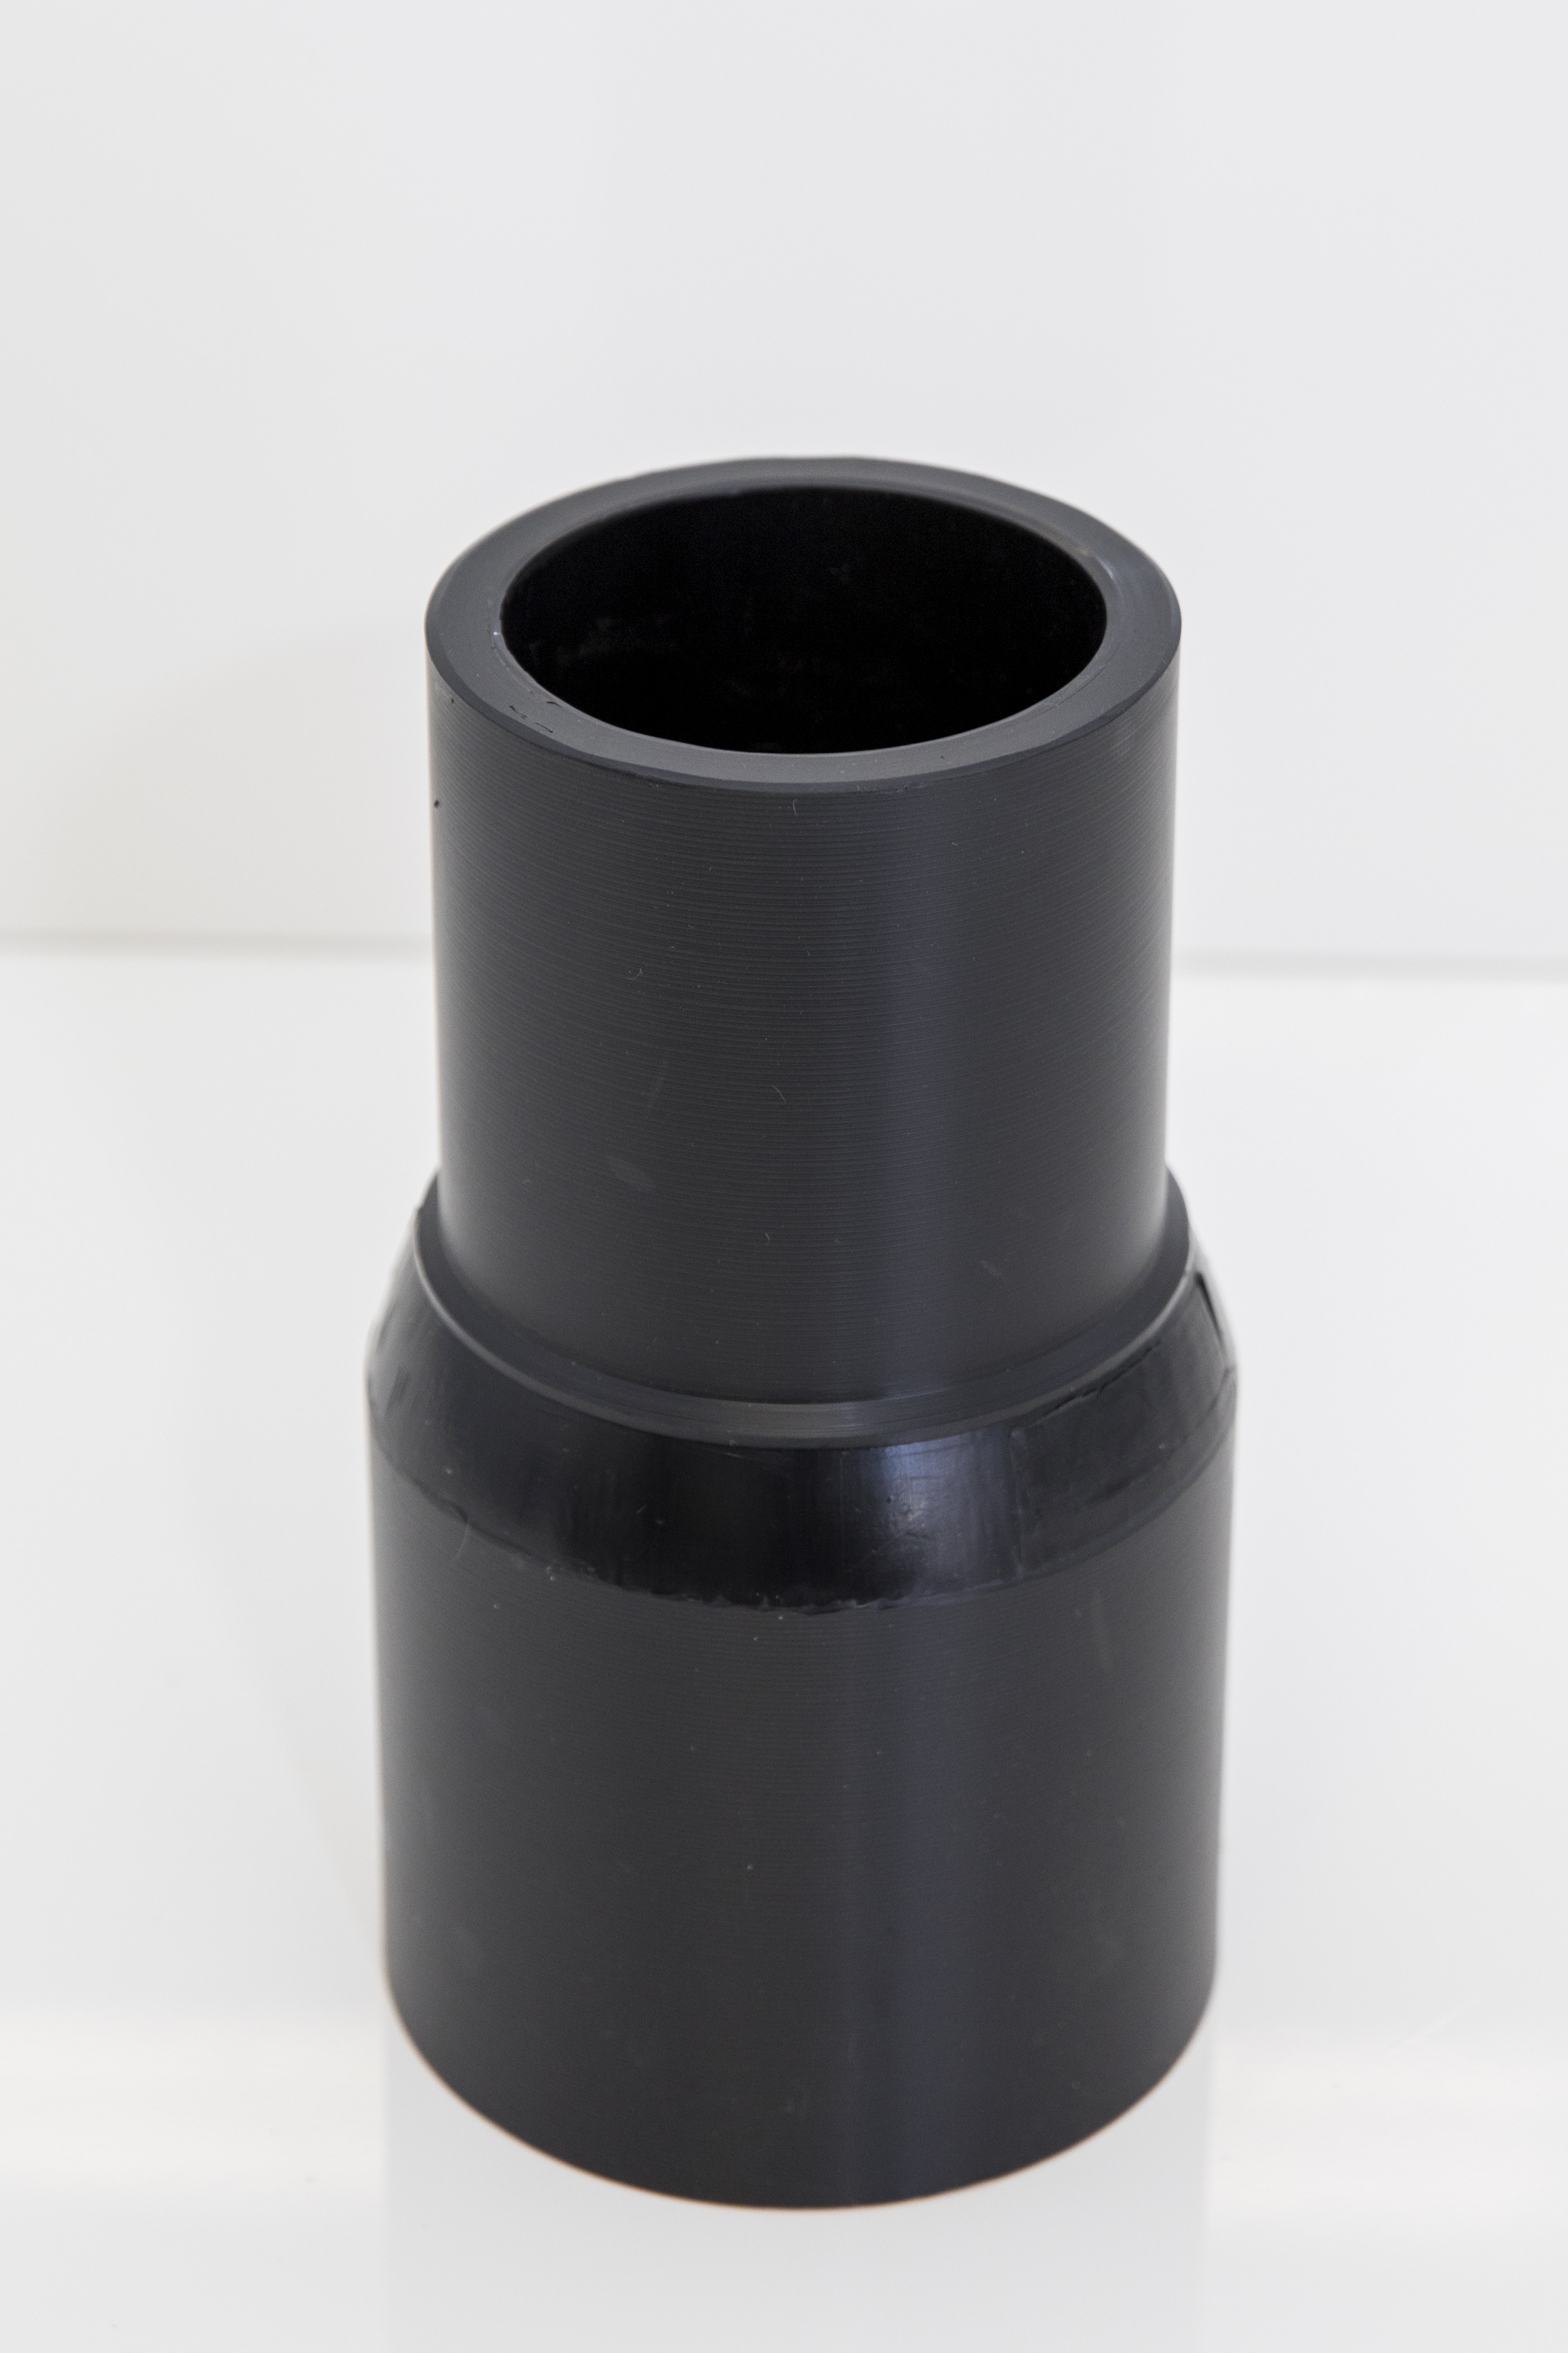 An image of a long spigot polyethylene concentric reducer against a white background.